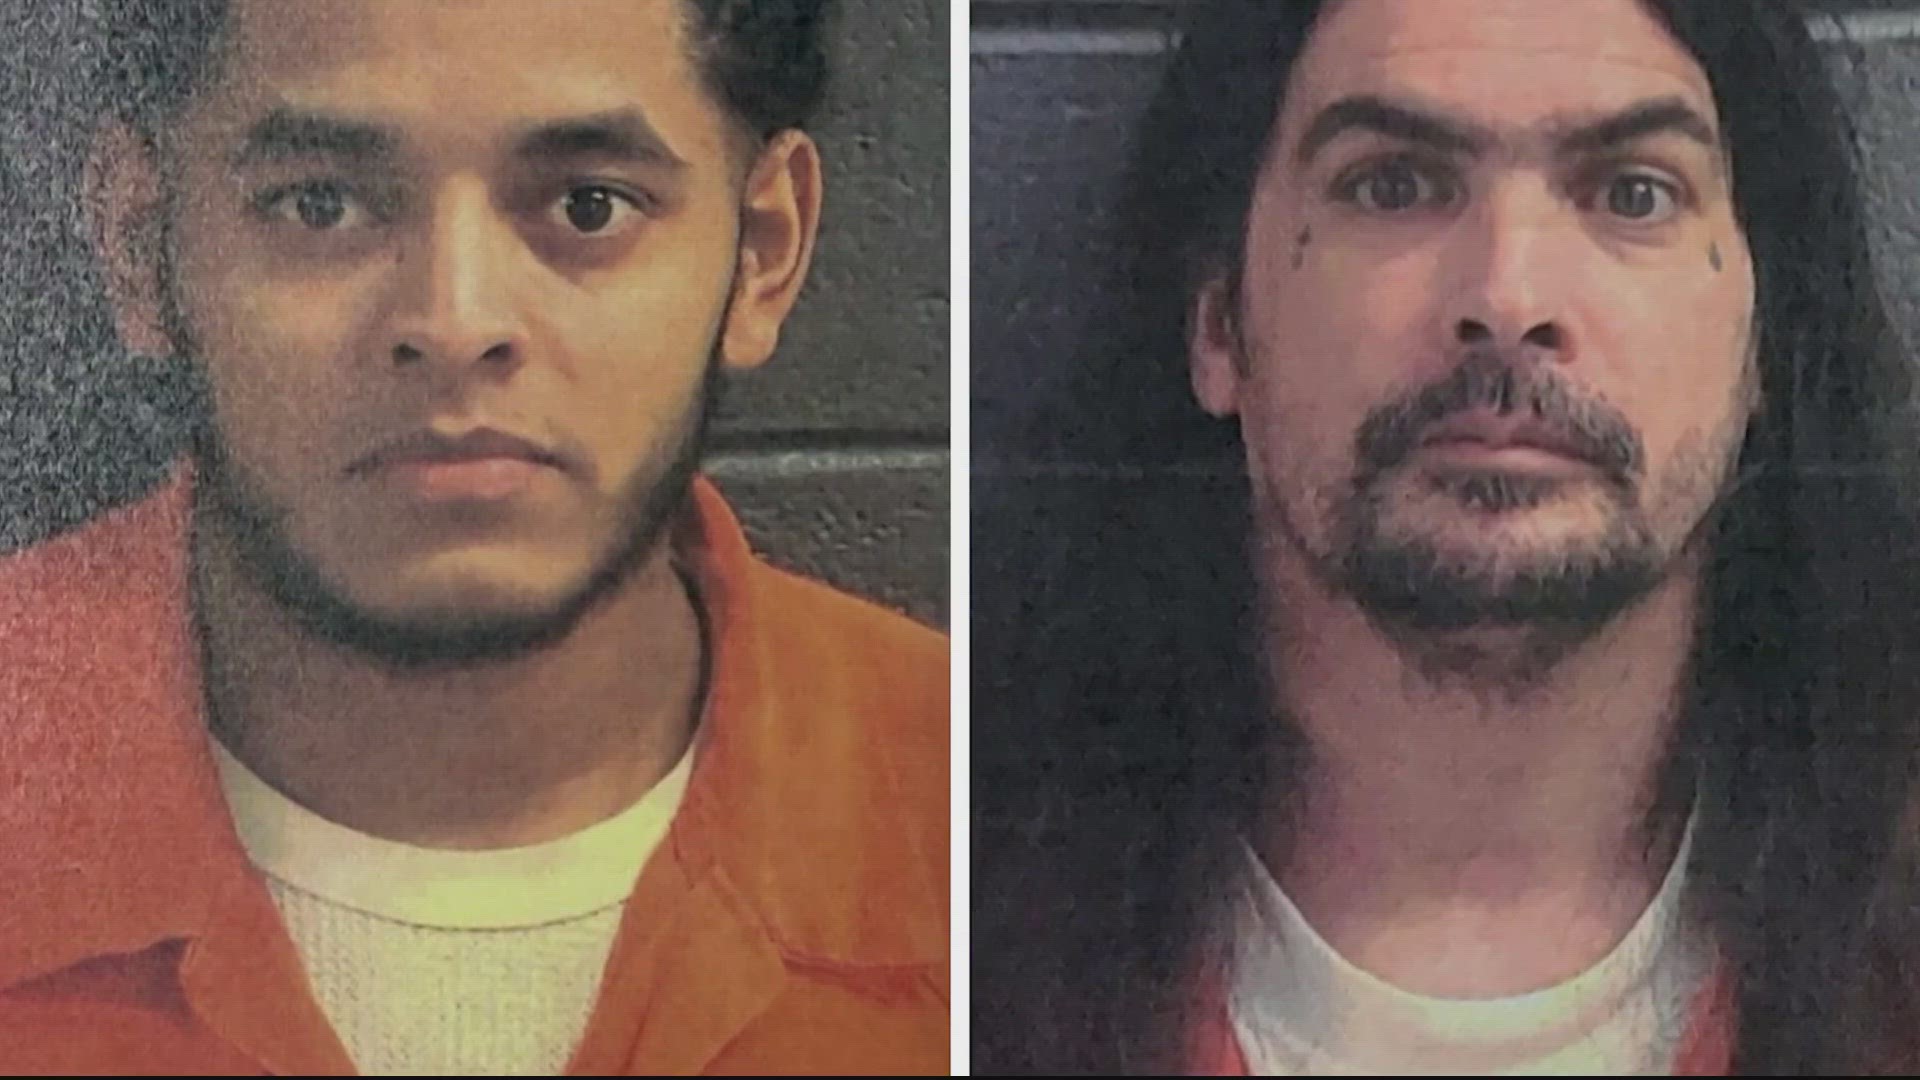 Law enforcement officials in both Virginia and North Carolina are searching for two men who escaped from a jail in Farmville, Virginia.